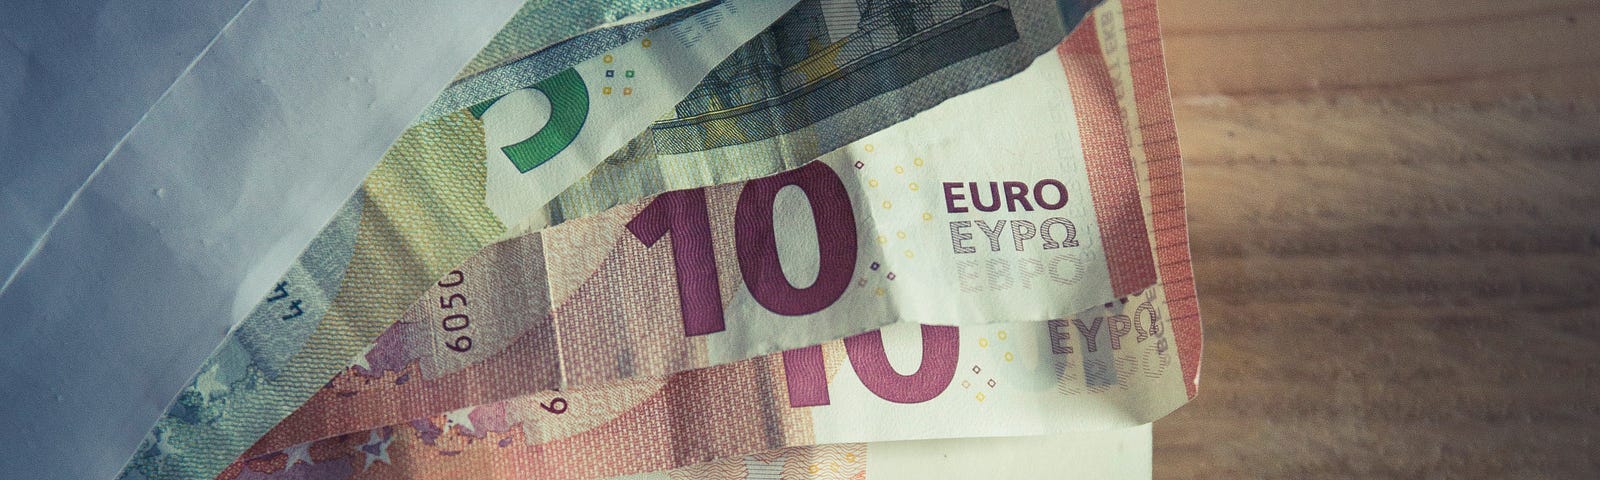 A picture of an envelope with euro bills of various denominations sticking out of it